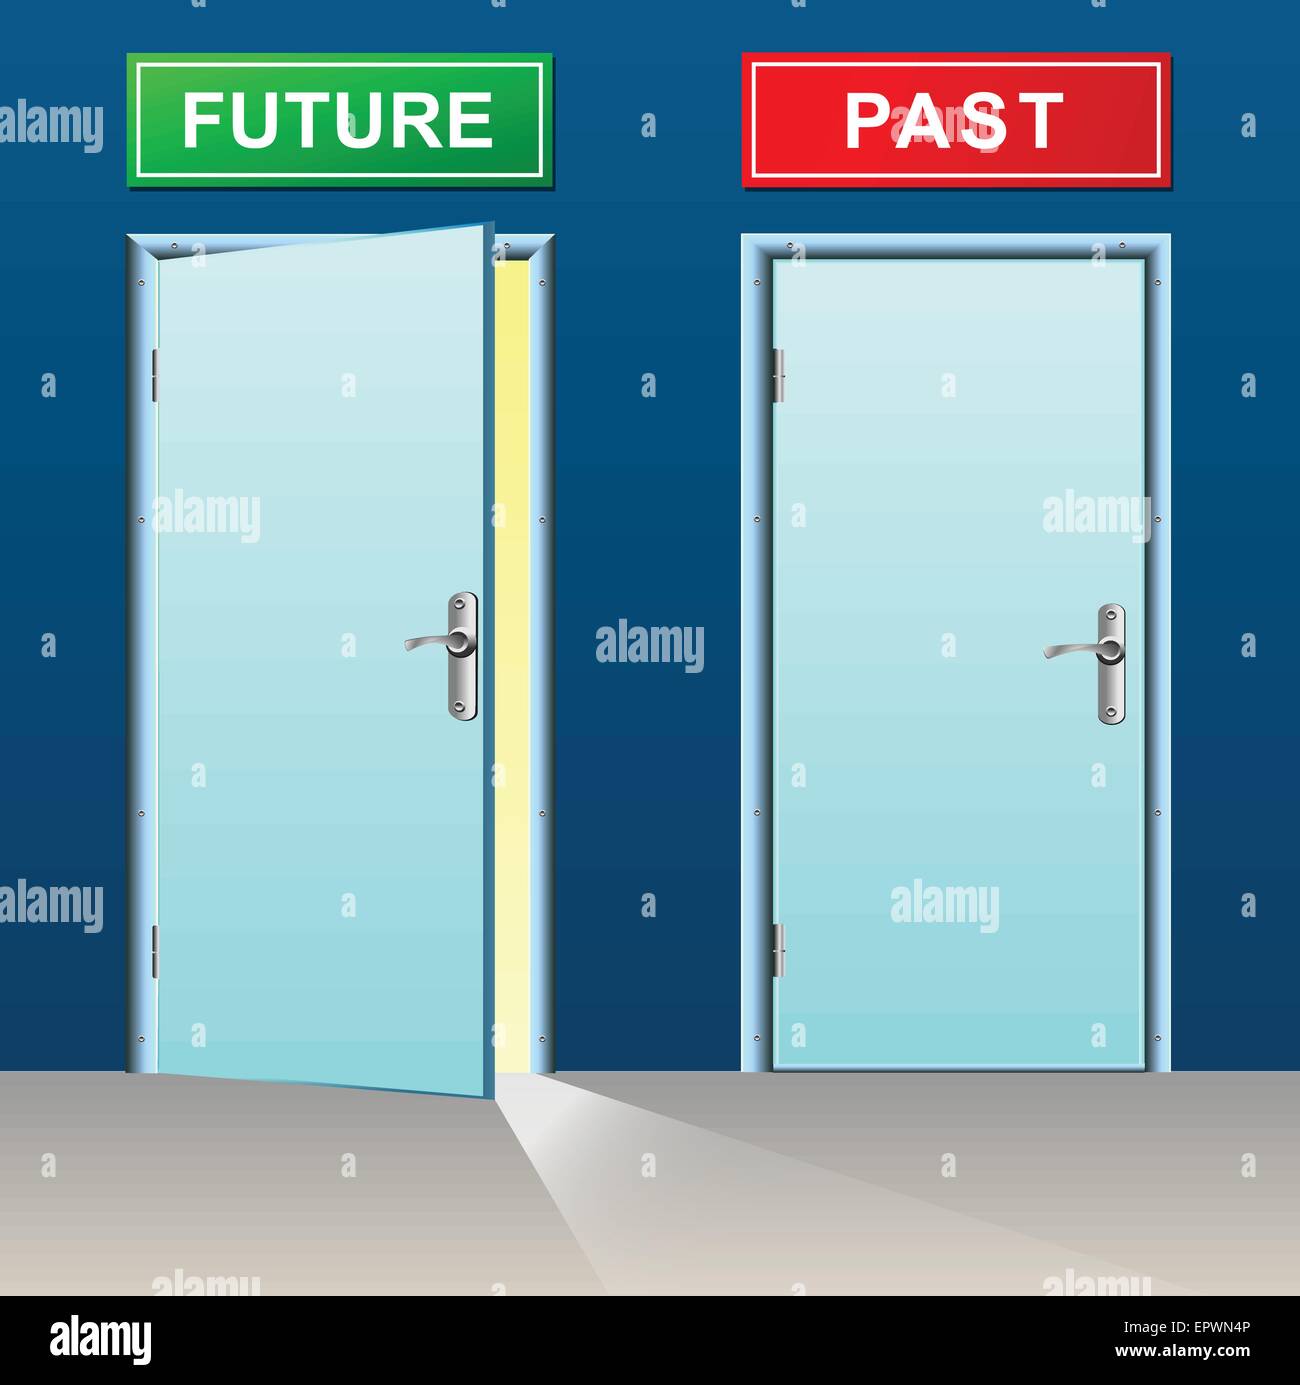 illustration of future and past doors concept Stock Vector